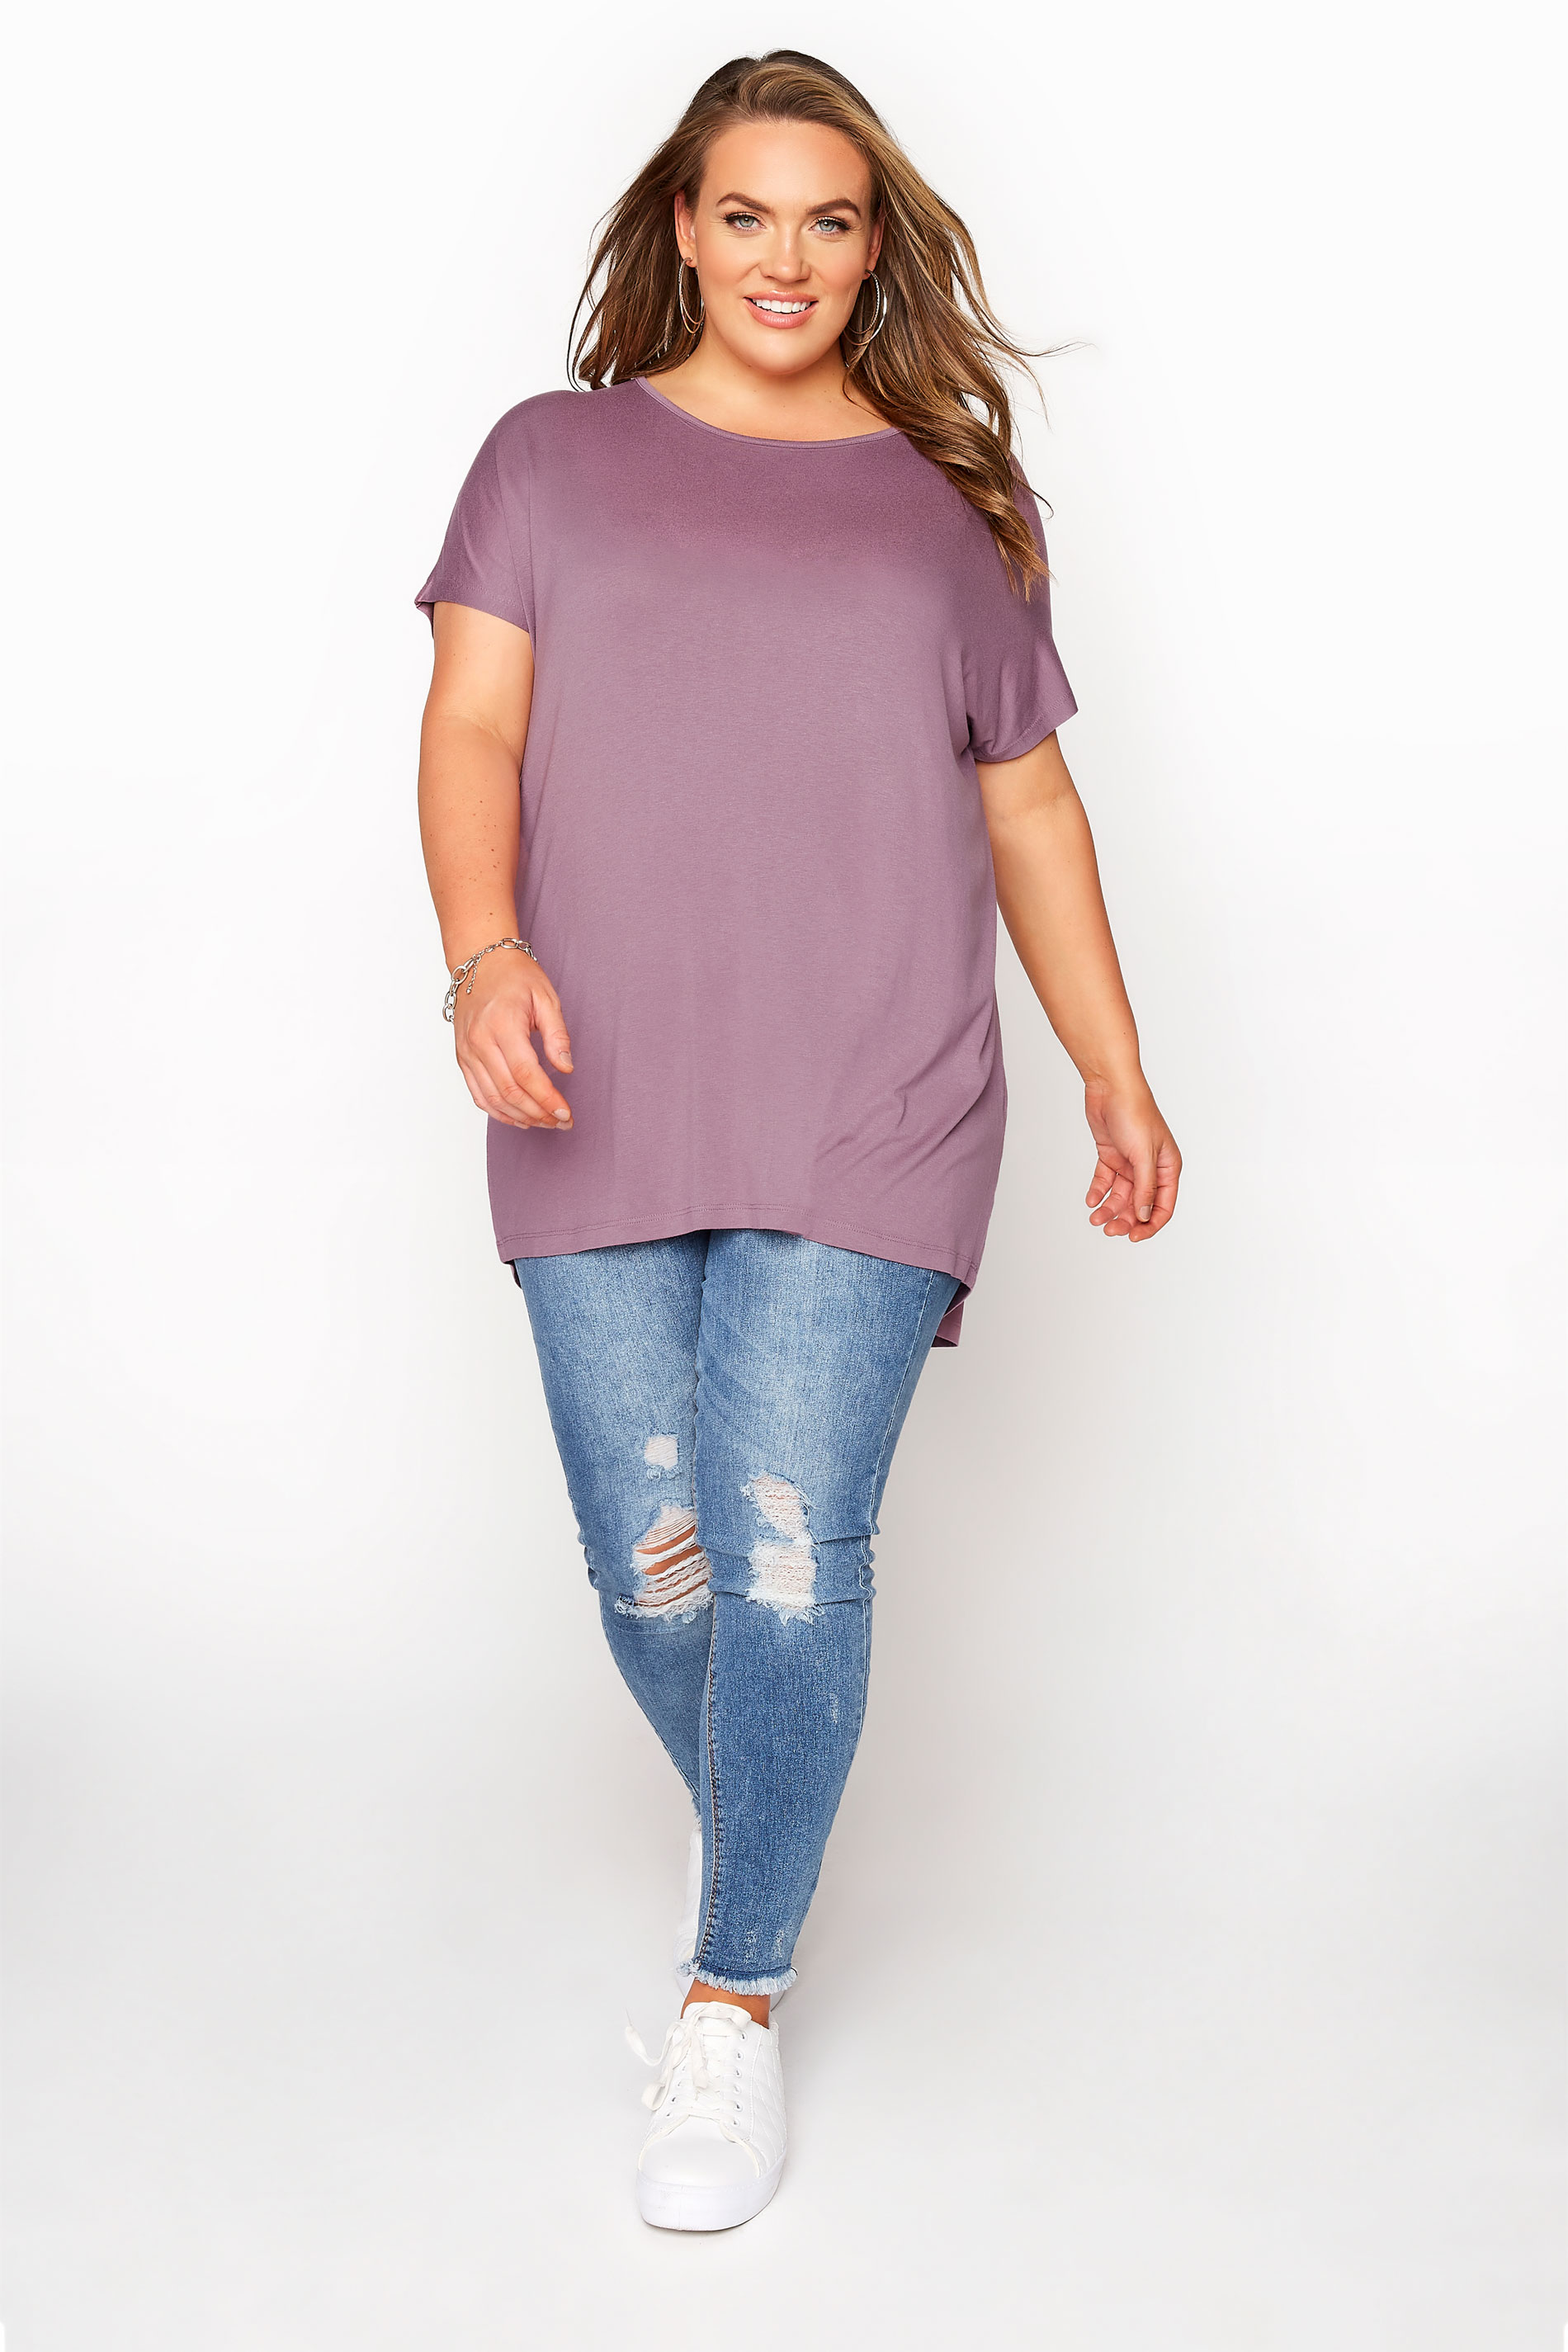 Grande taille  Tops Grande taille  T-Shirts | T-Shirt Mauve Ourlet Plongeant Manches Courtes - KF20692